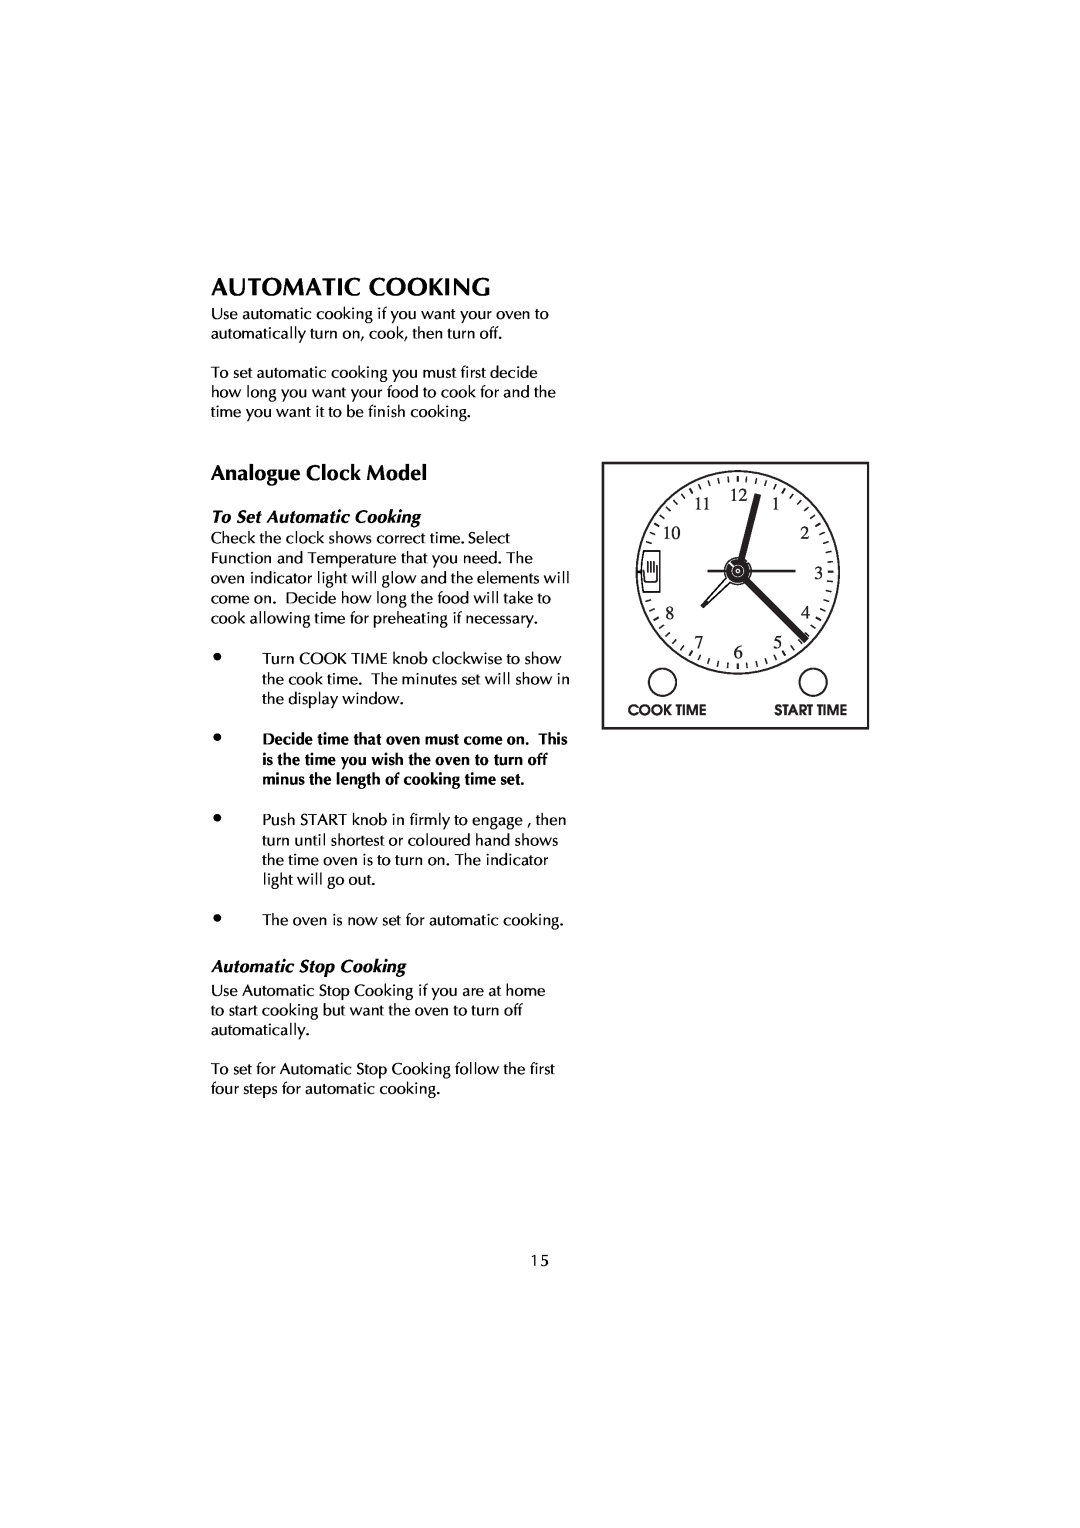 Fisher & Paykel 447443 manual To Set Automatic Cooking, Automatic Stop Cooking 